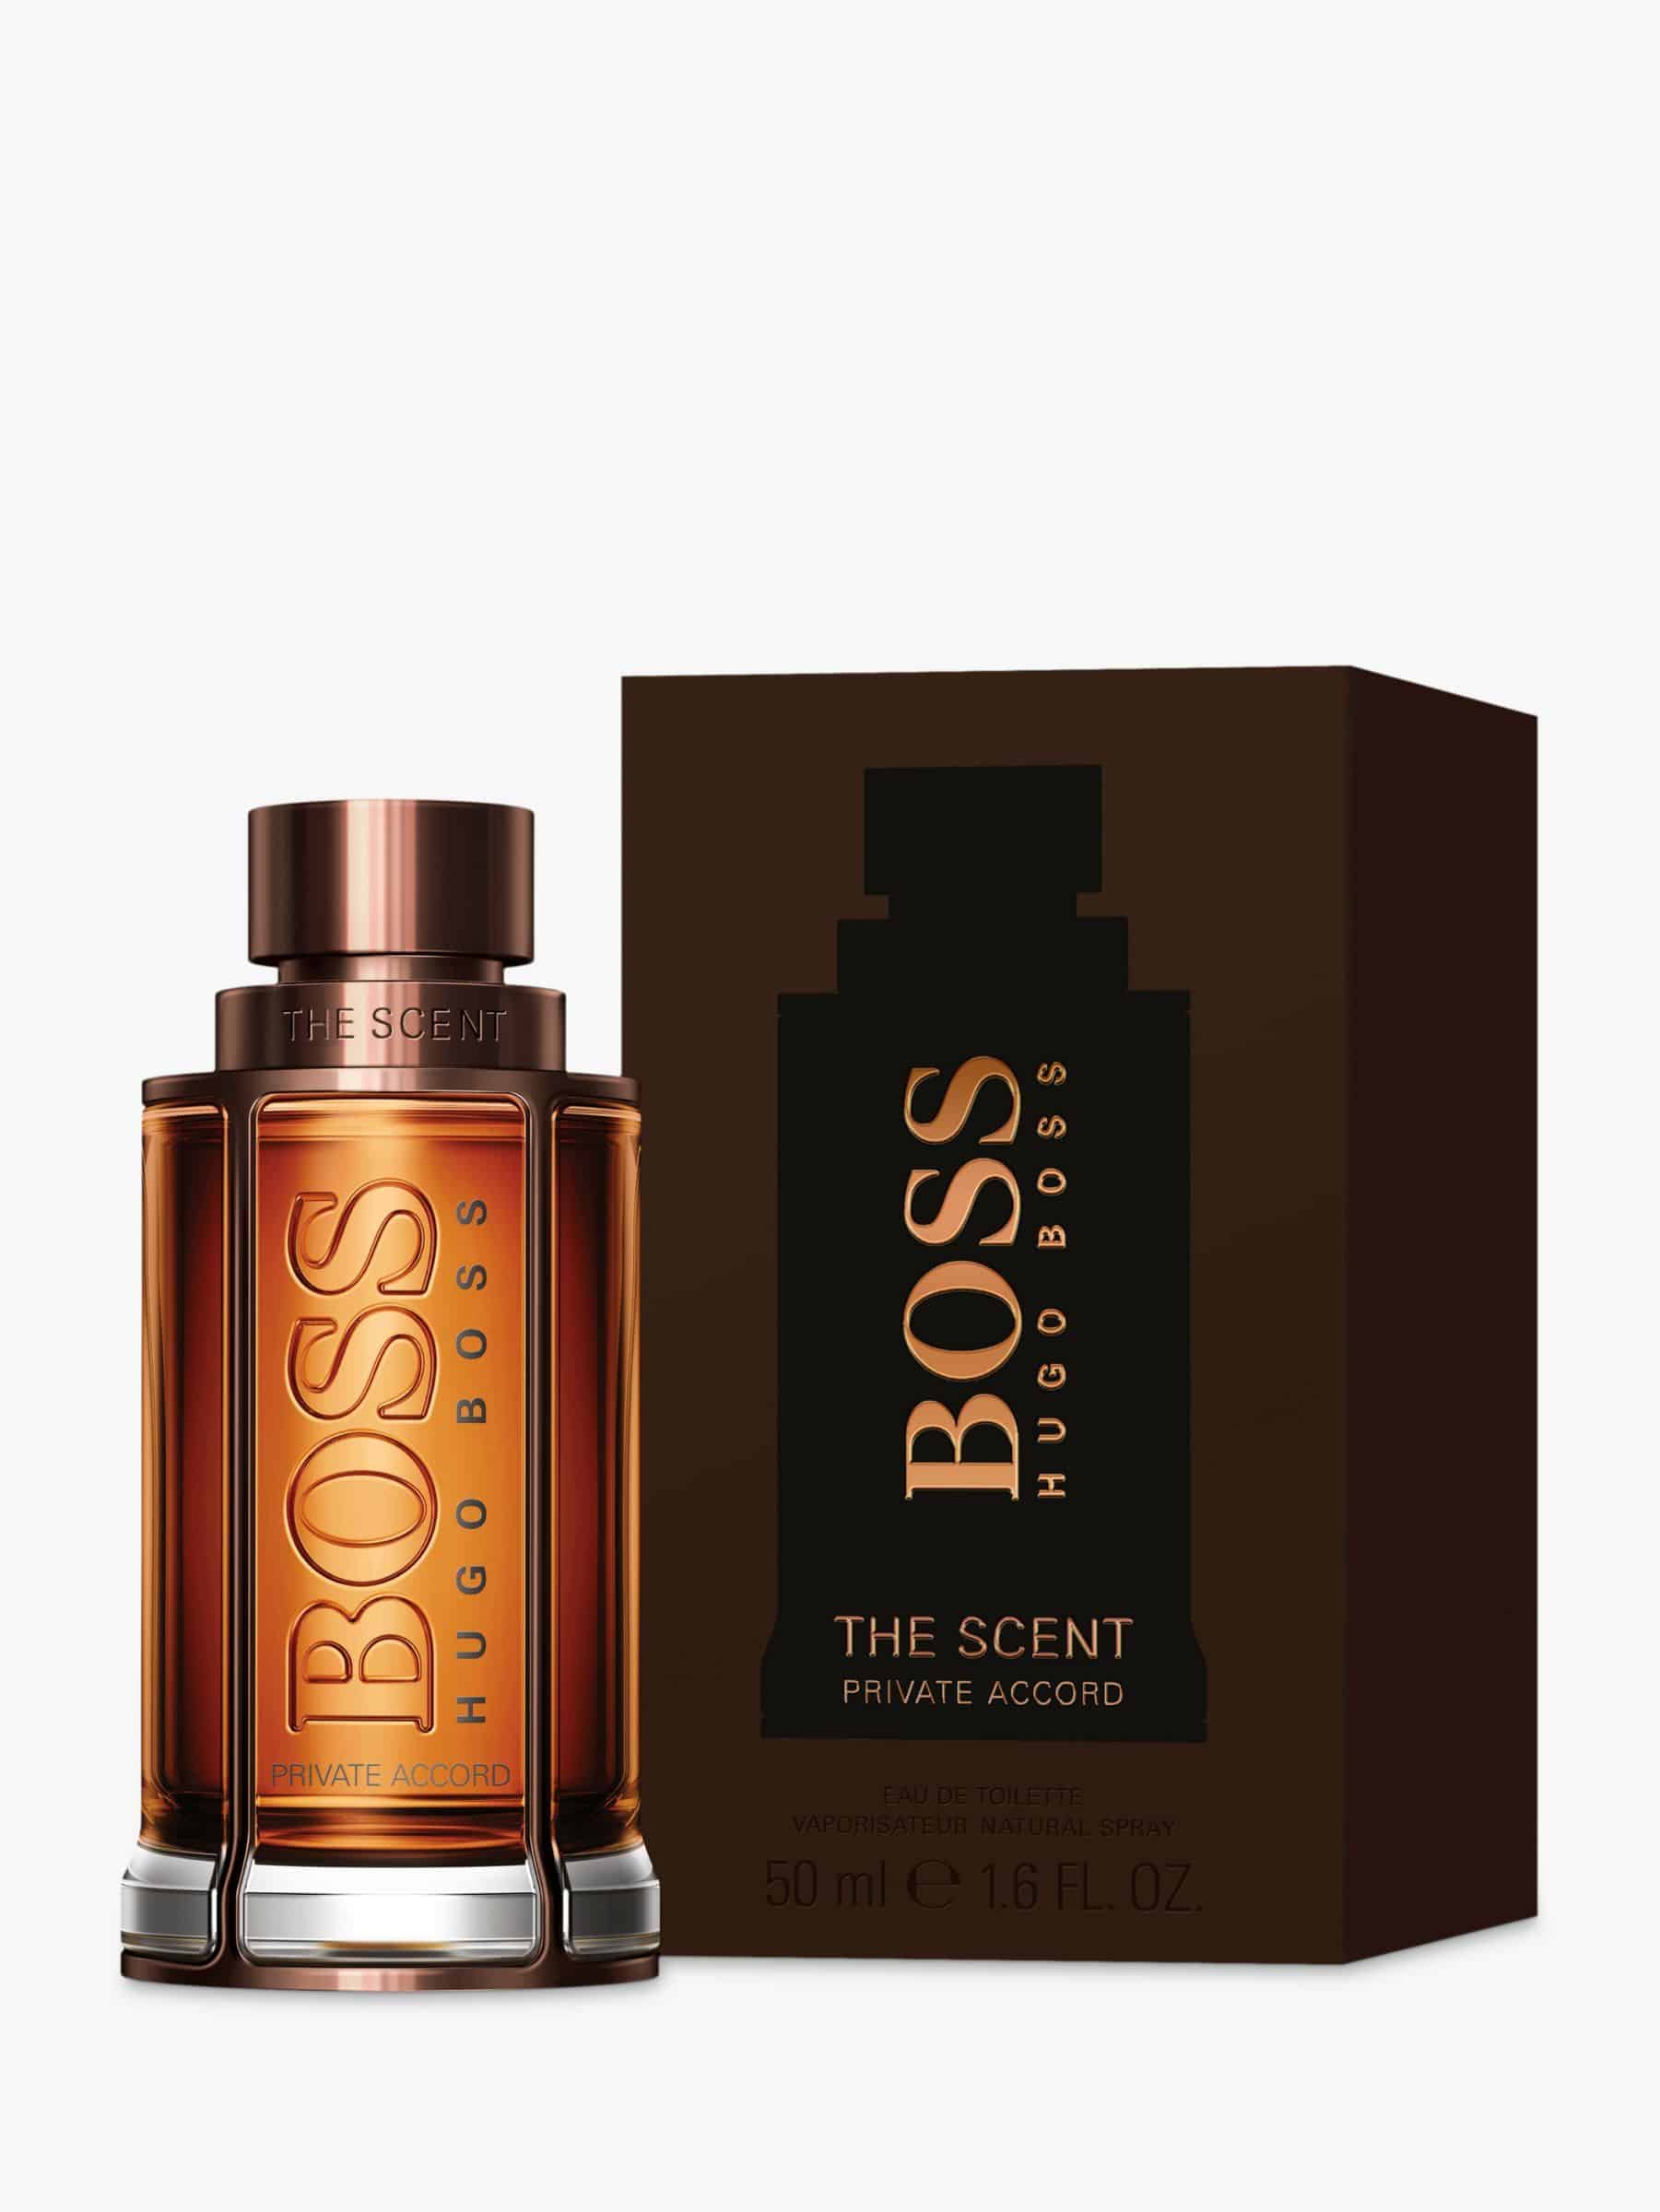 hugo boss the scent private accord review